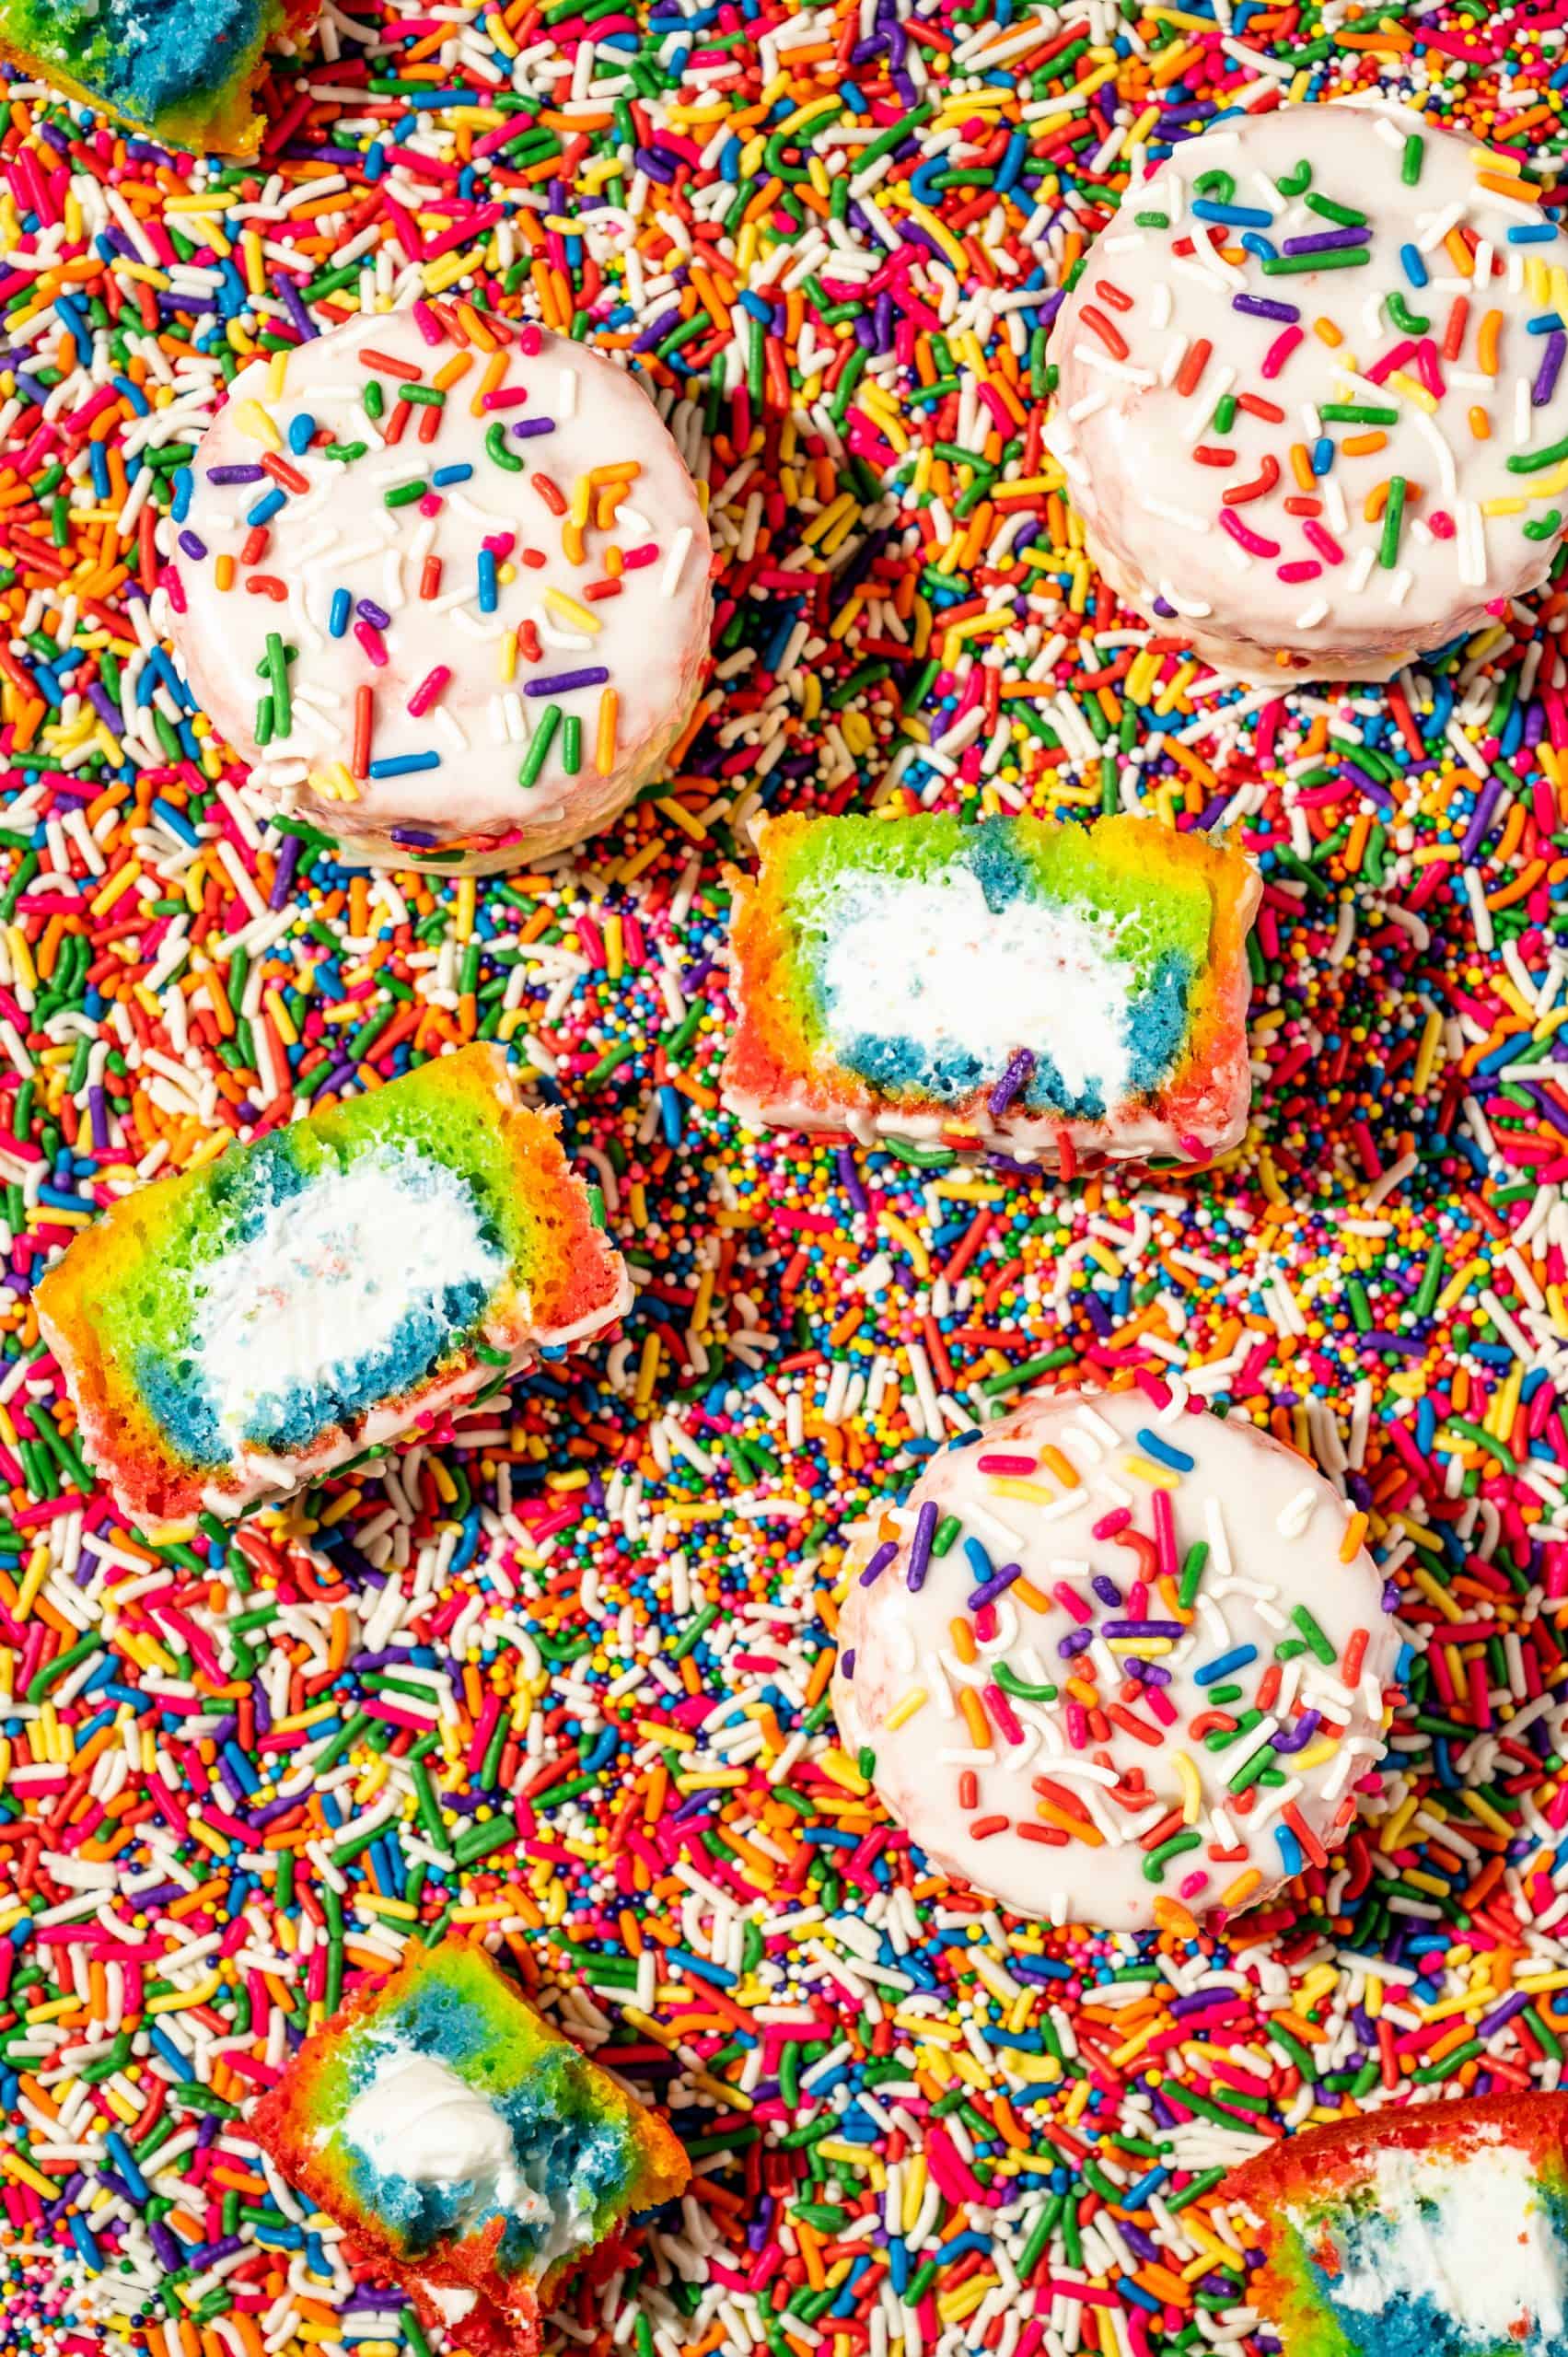 vanilla ding dongs with rainbow sprinkles, 1 cut in half to reveal rainbow cake and creme filling